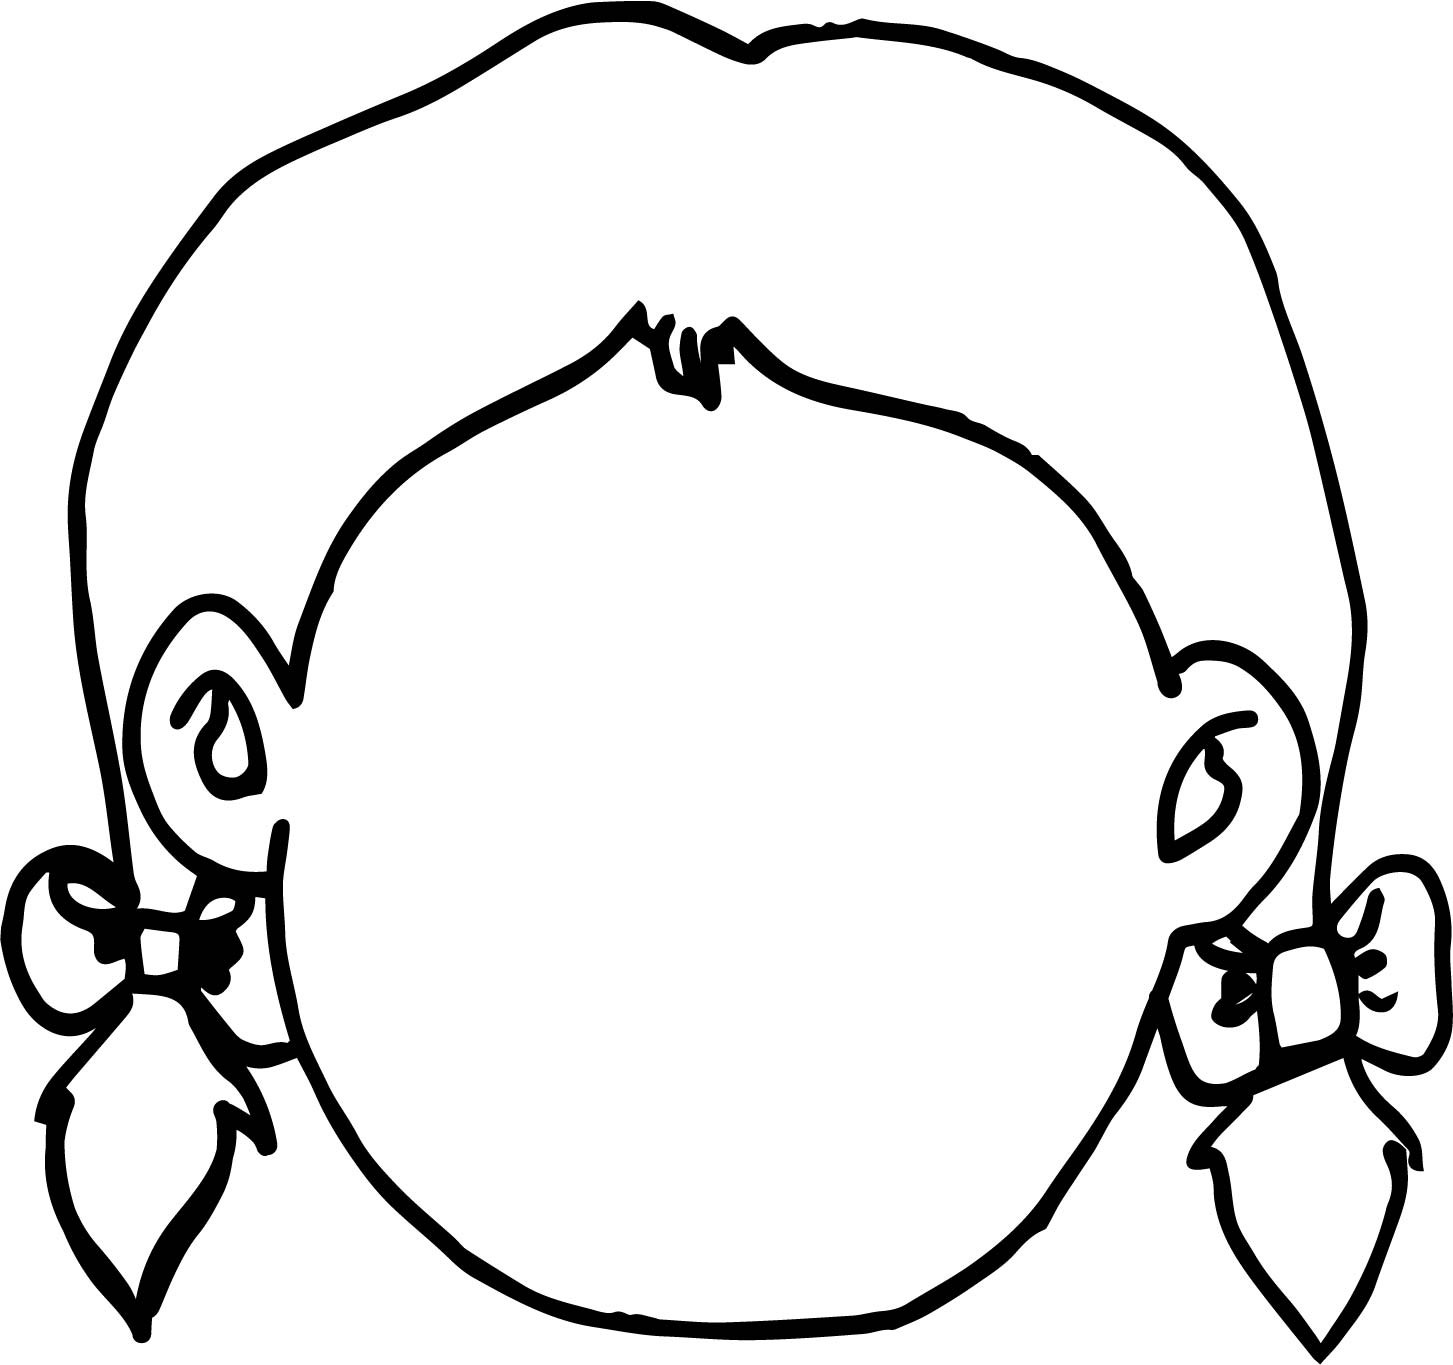 Girl Face Coloring Pages at GetColorings com Free printable colorings